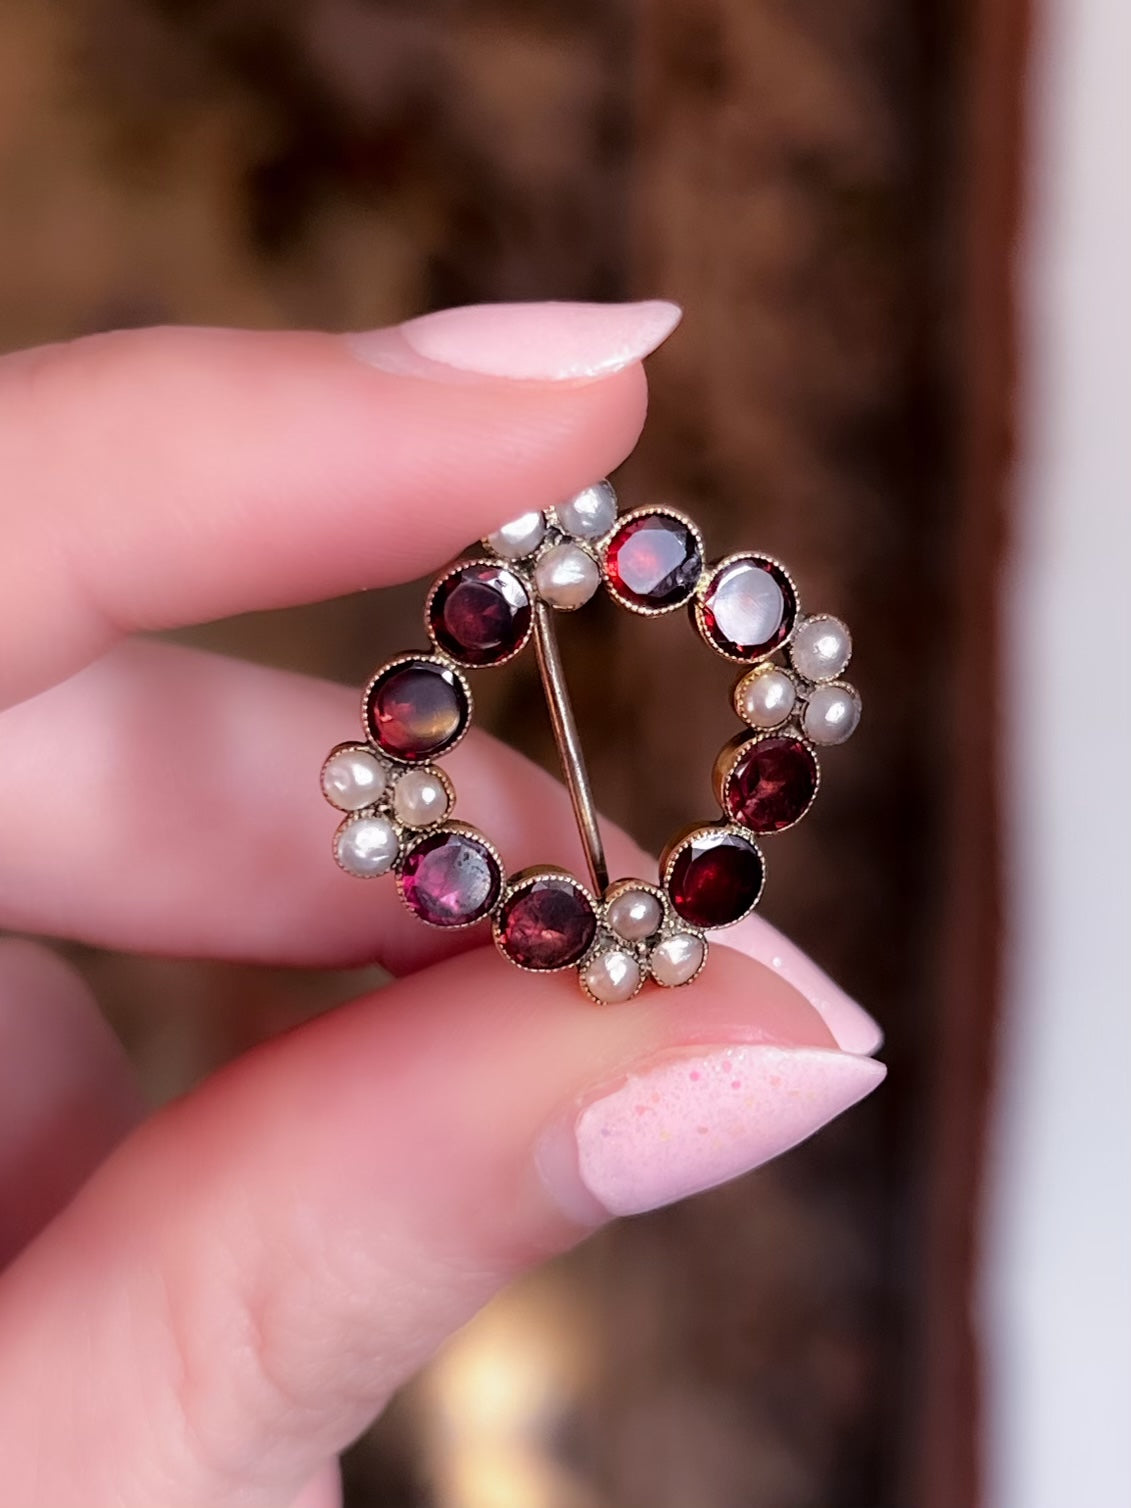 A Stunning Foiled Garnet and Pearl Regency Period Brooch